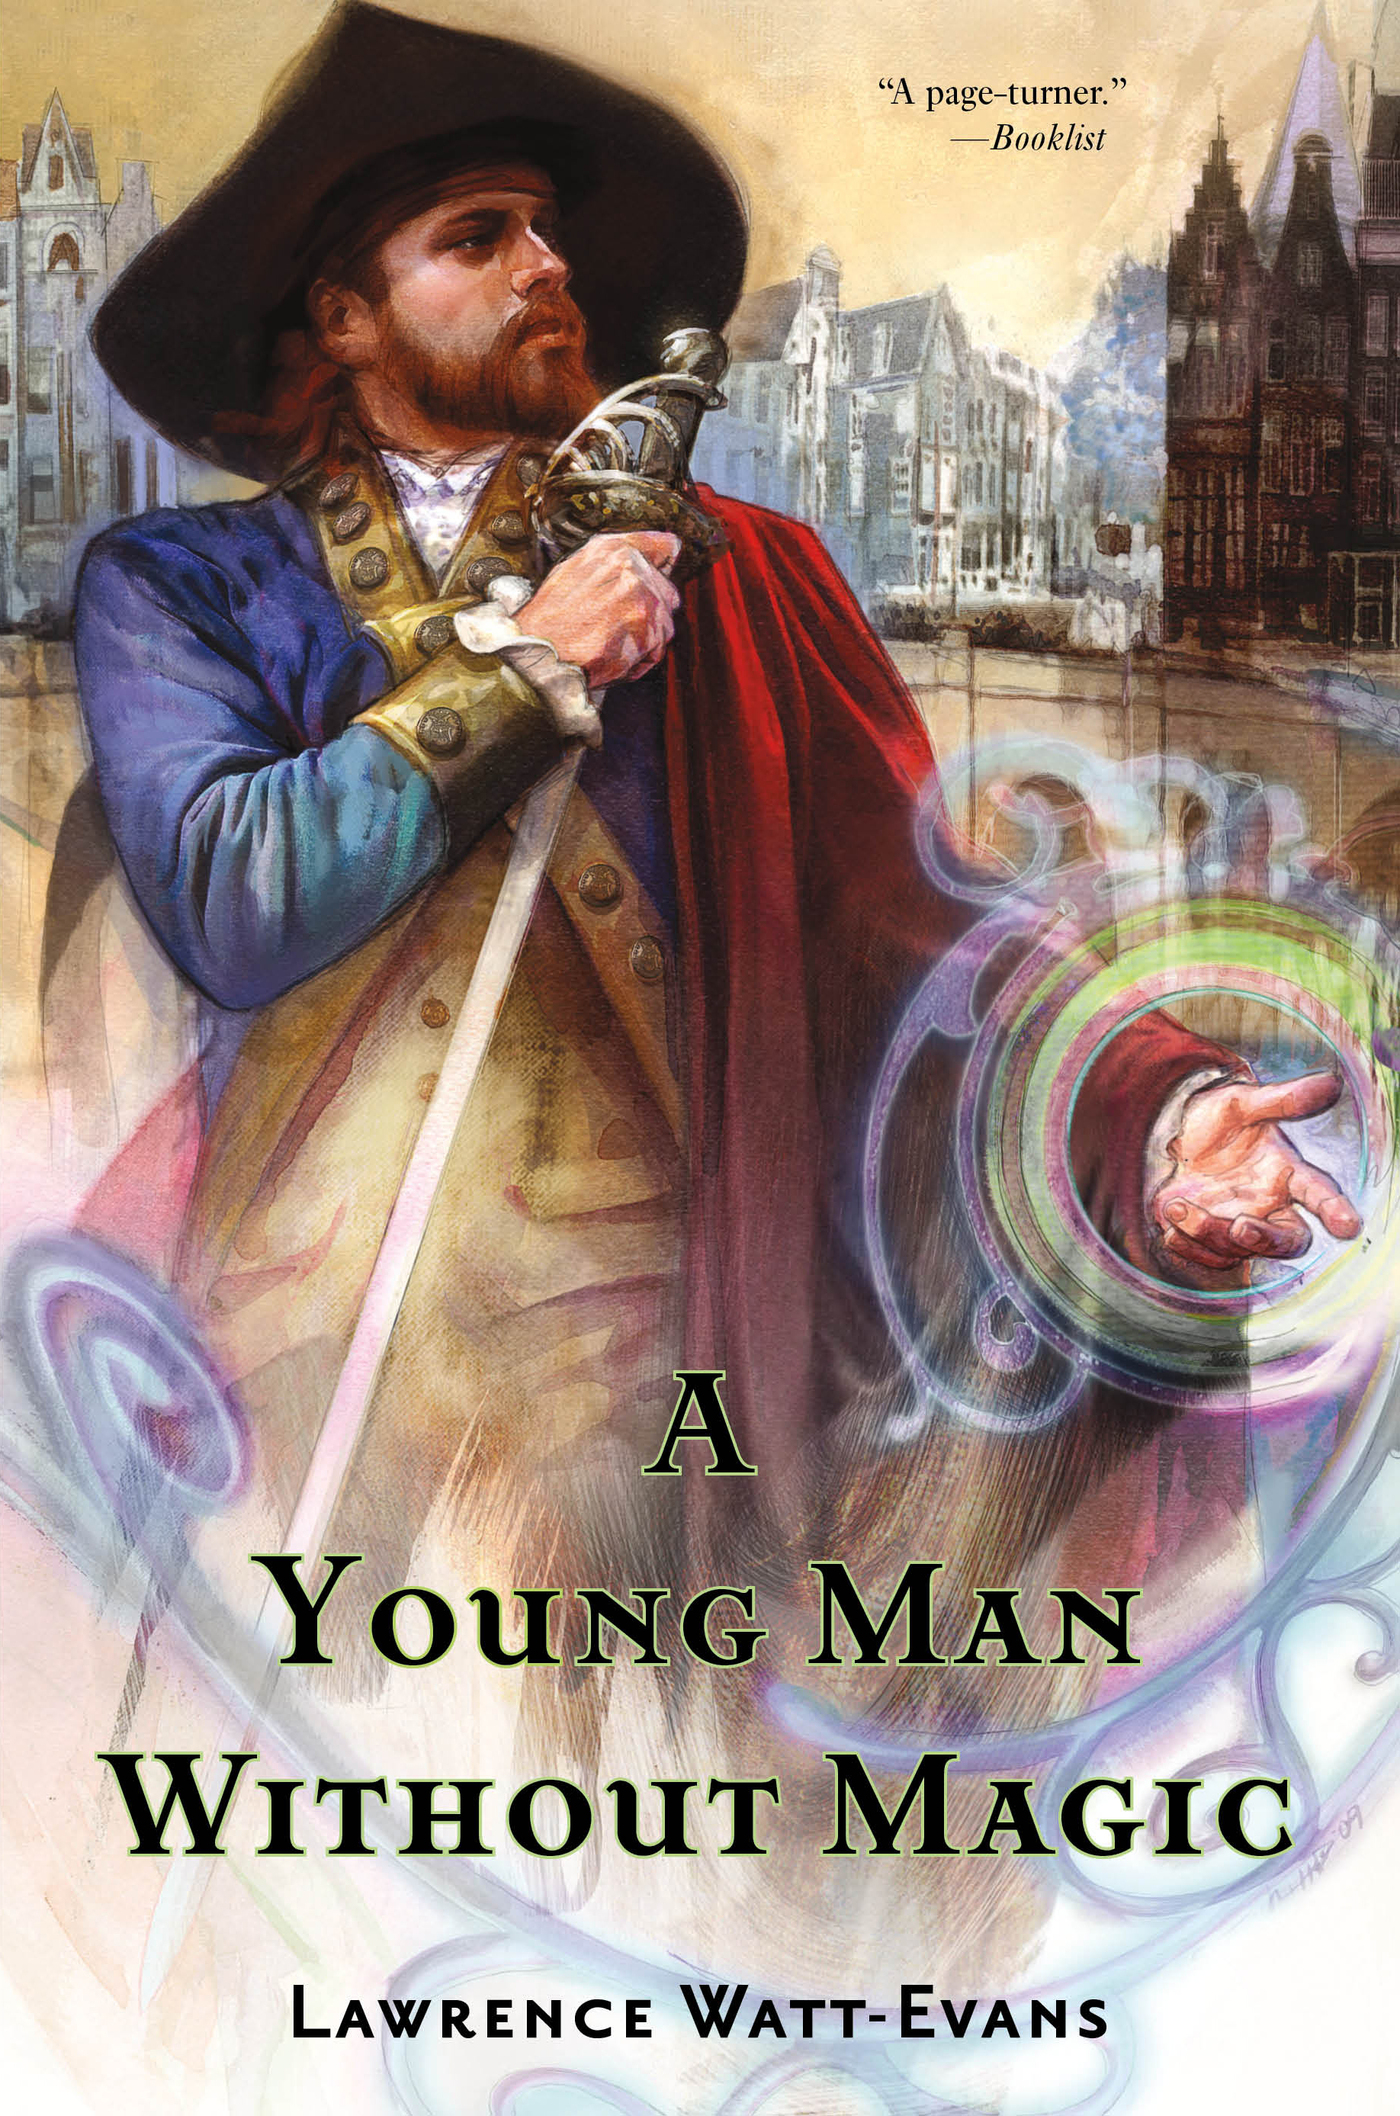 A Young Man Without Magic by Lawrence Watt-Evans